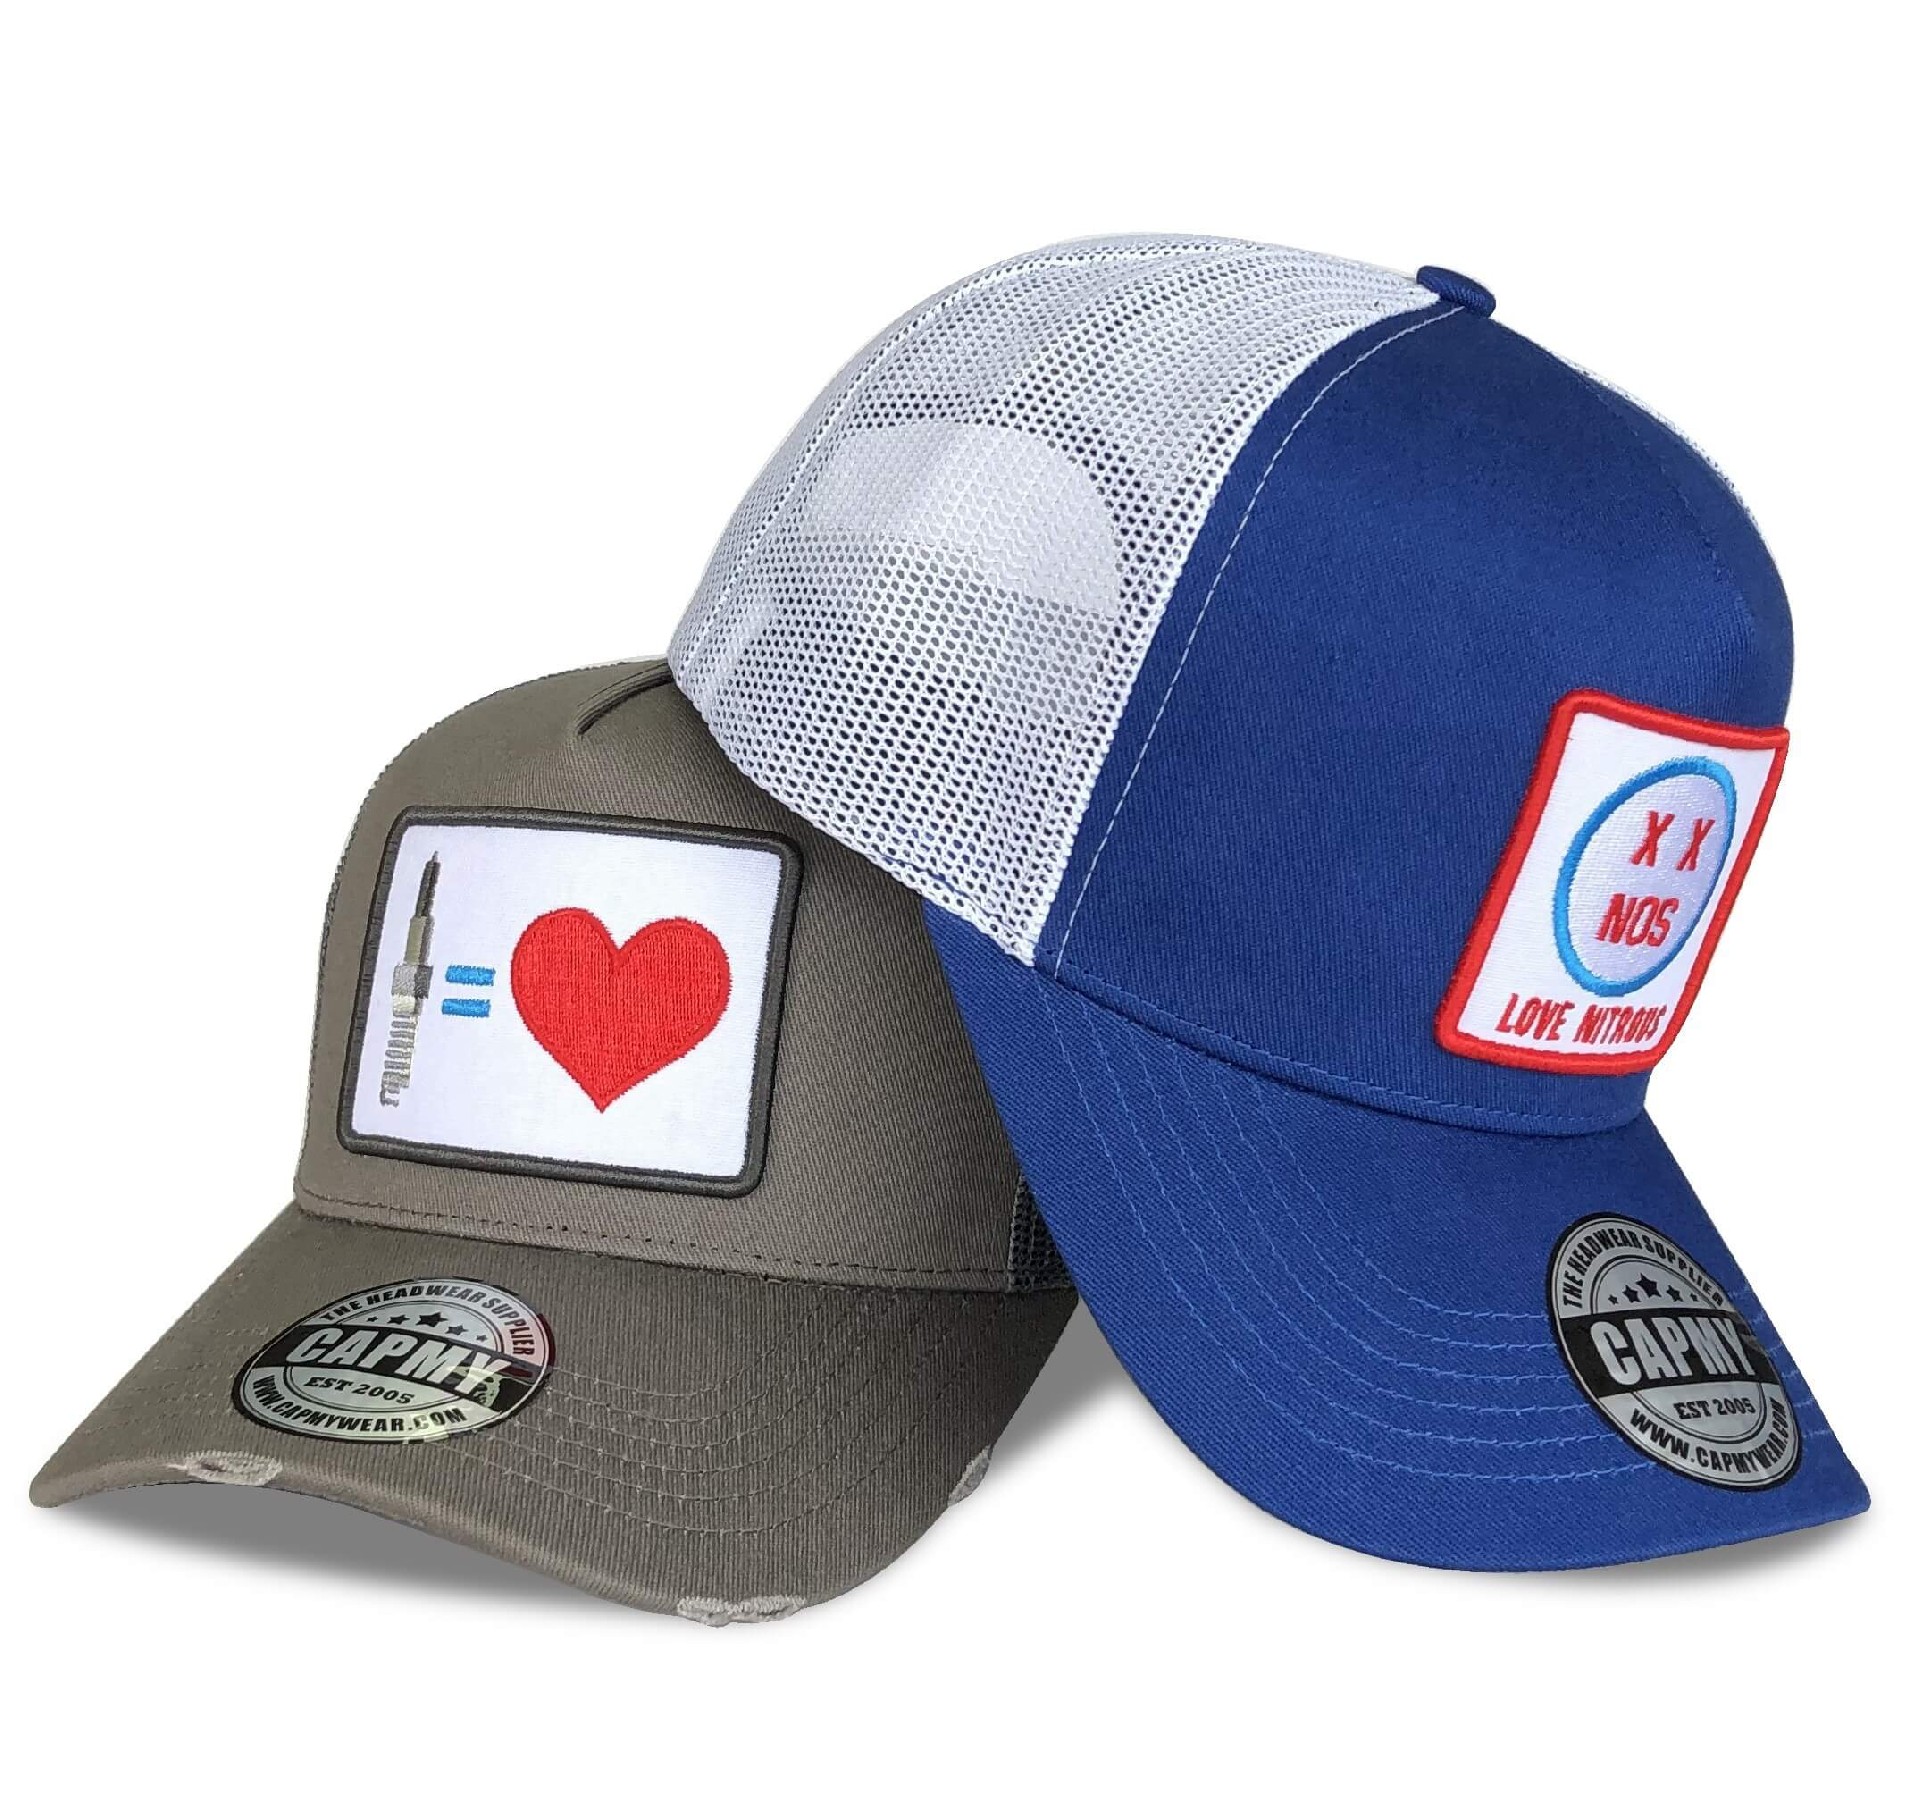 CMC-3108 (High Quality 5 Panel 3d Puff Embroidery Logo Snap Back Truck Cap Distressed Vintage Rip Trucker Hat)